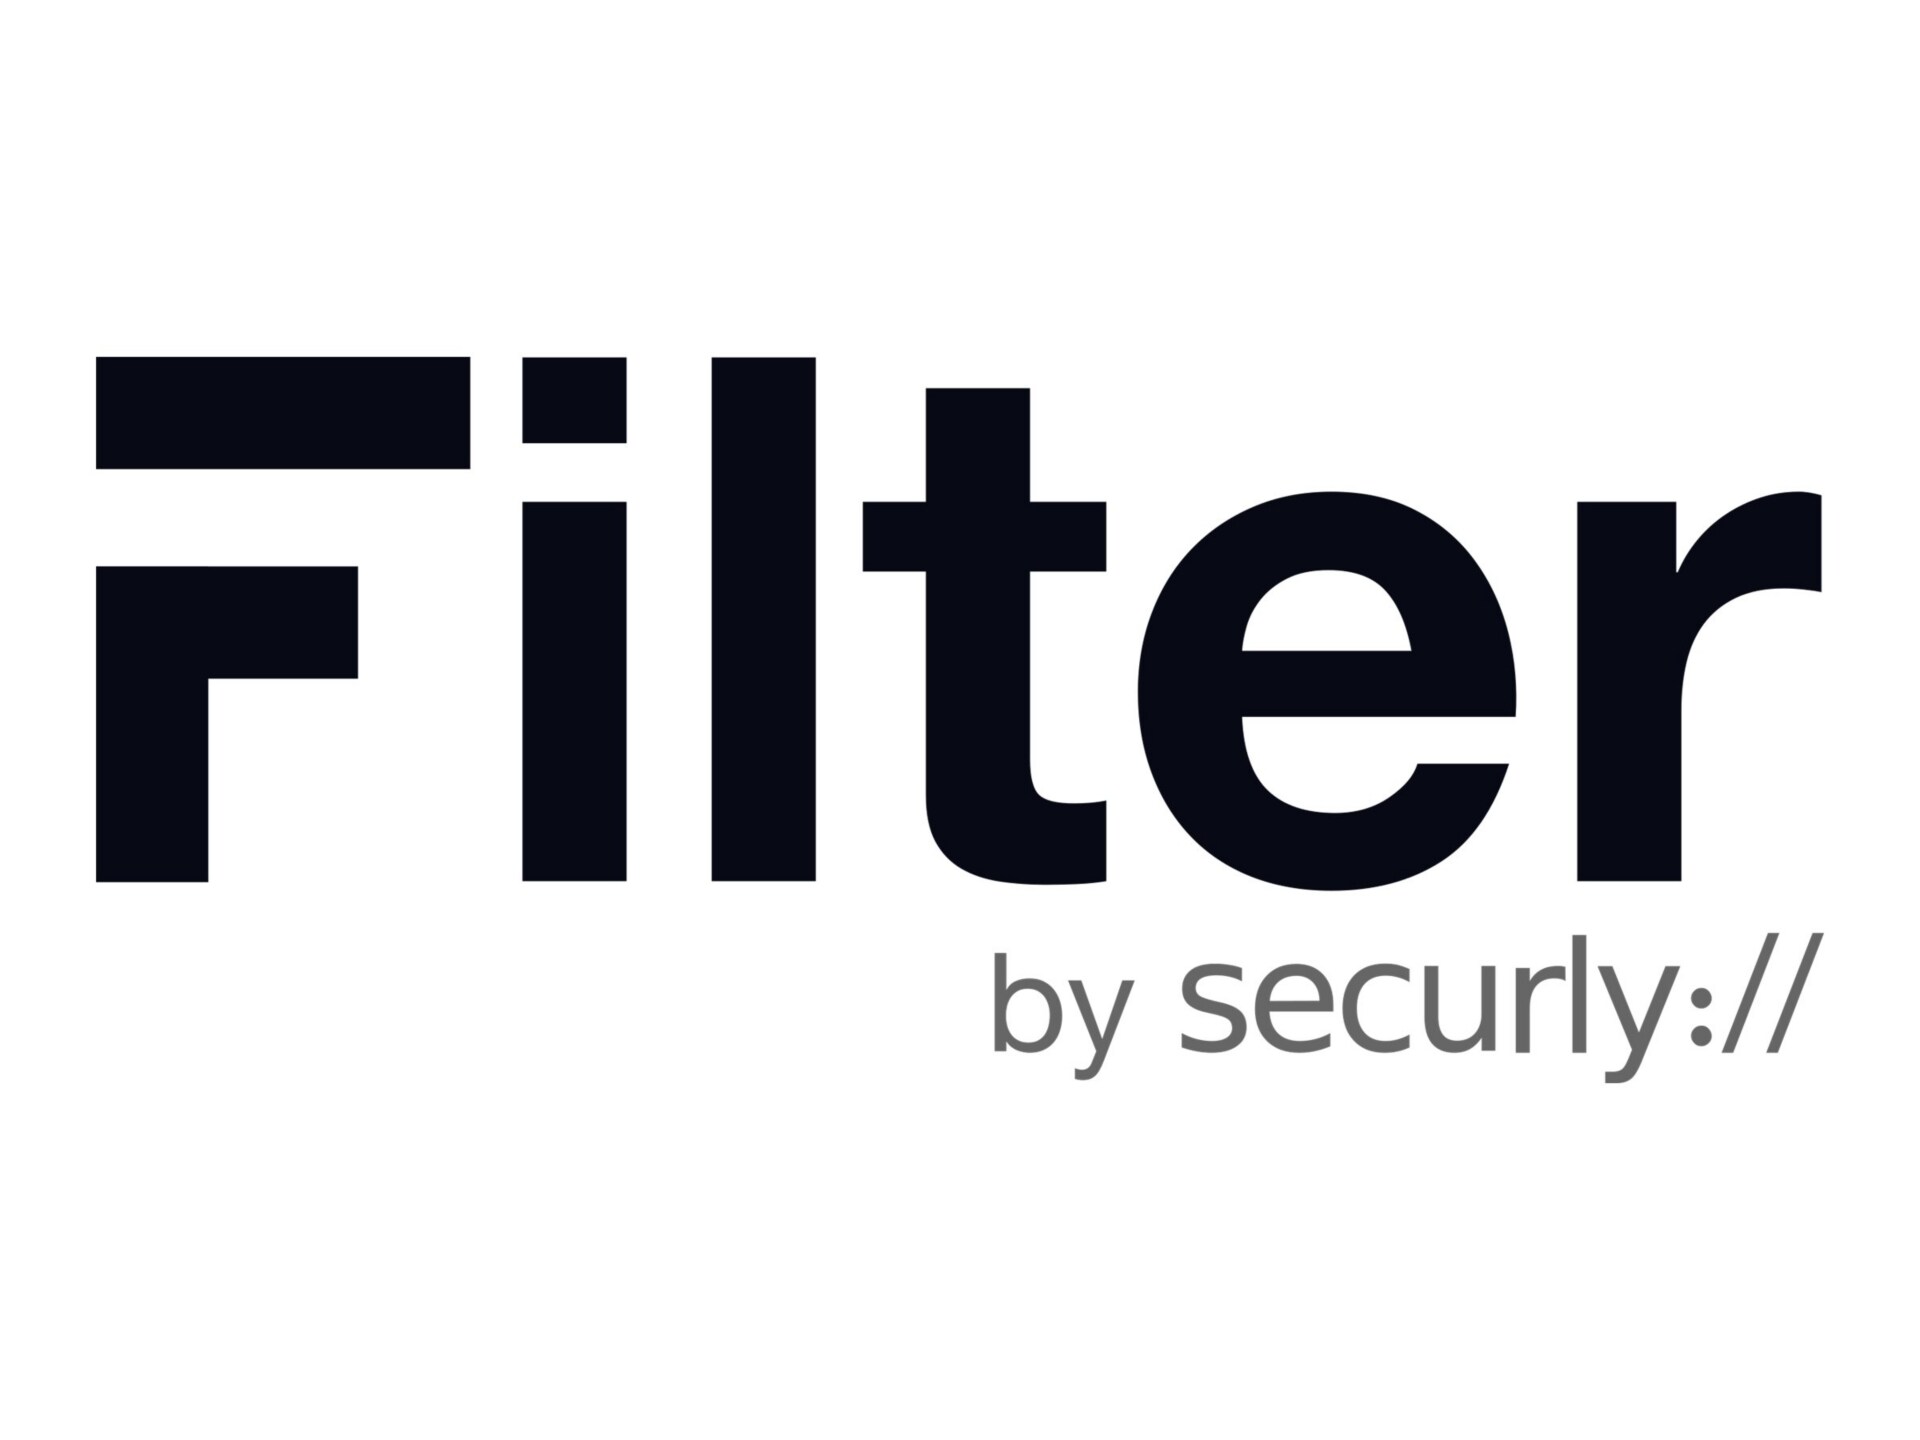 SECURLY ANYWHERE FILTER 3Y